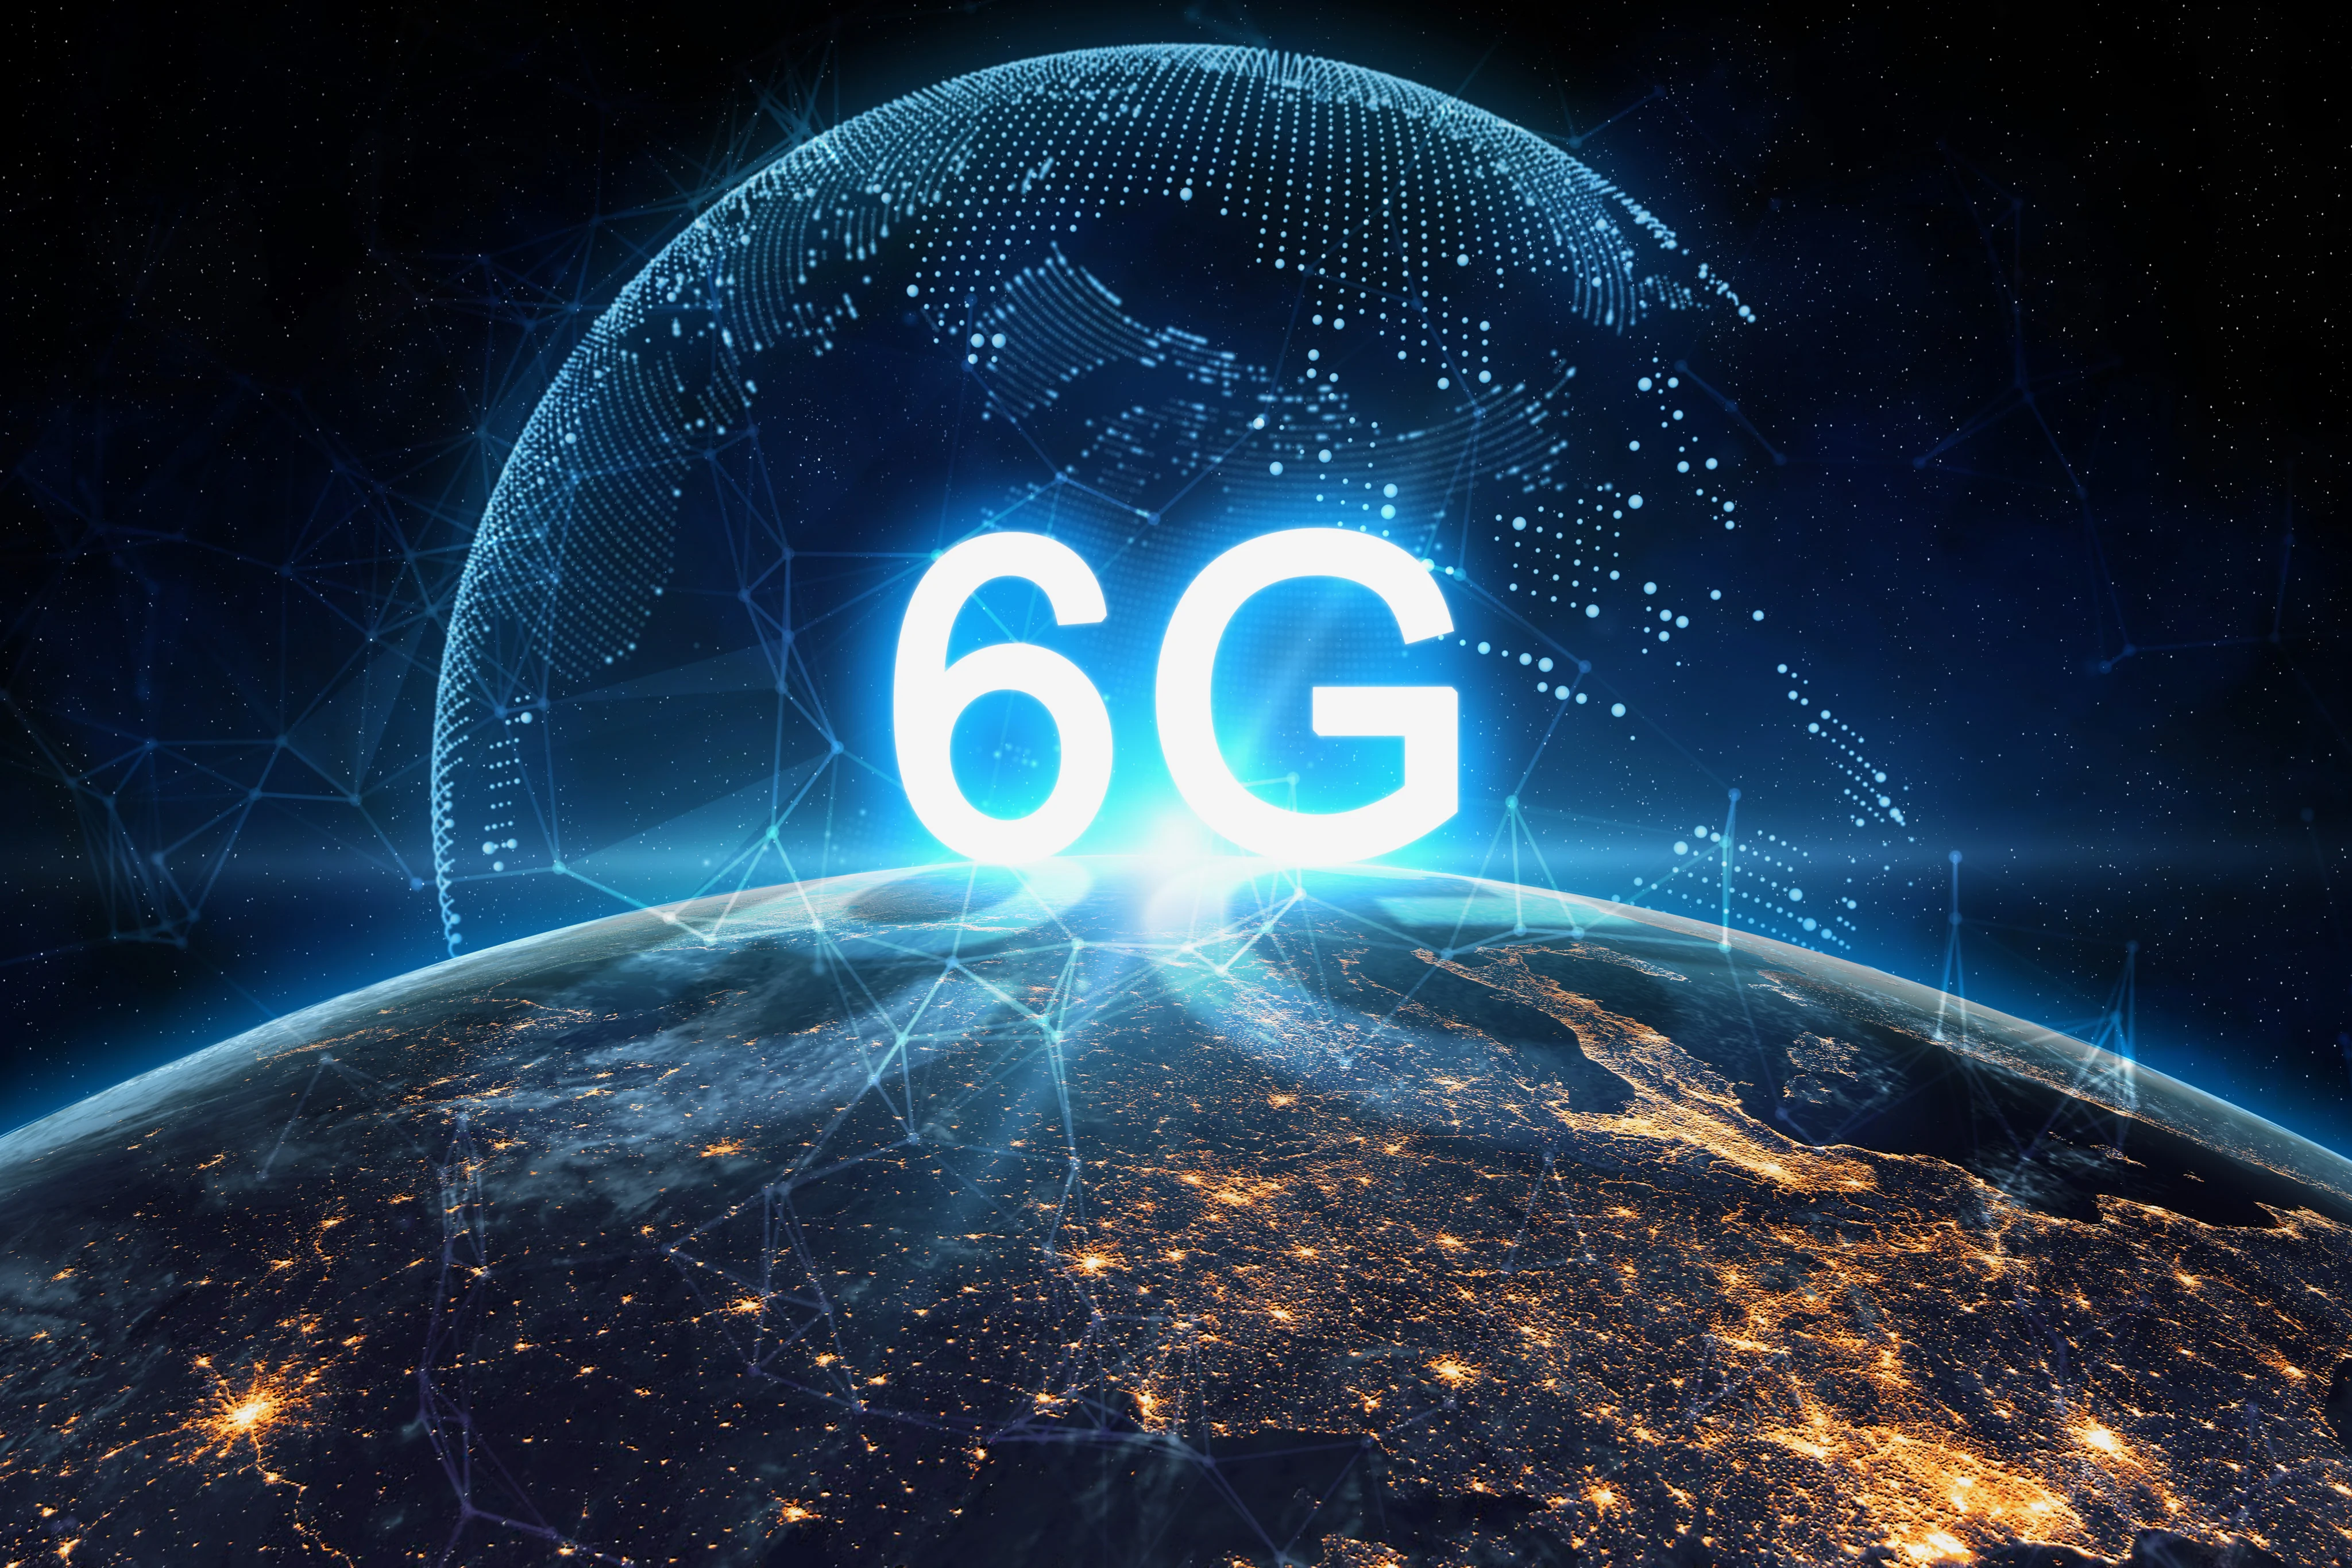 Chinese scientists claim that 6G mobile communication can have a positive effect on brain biology